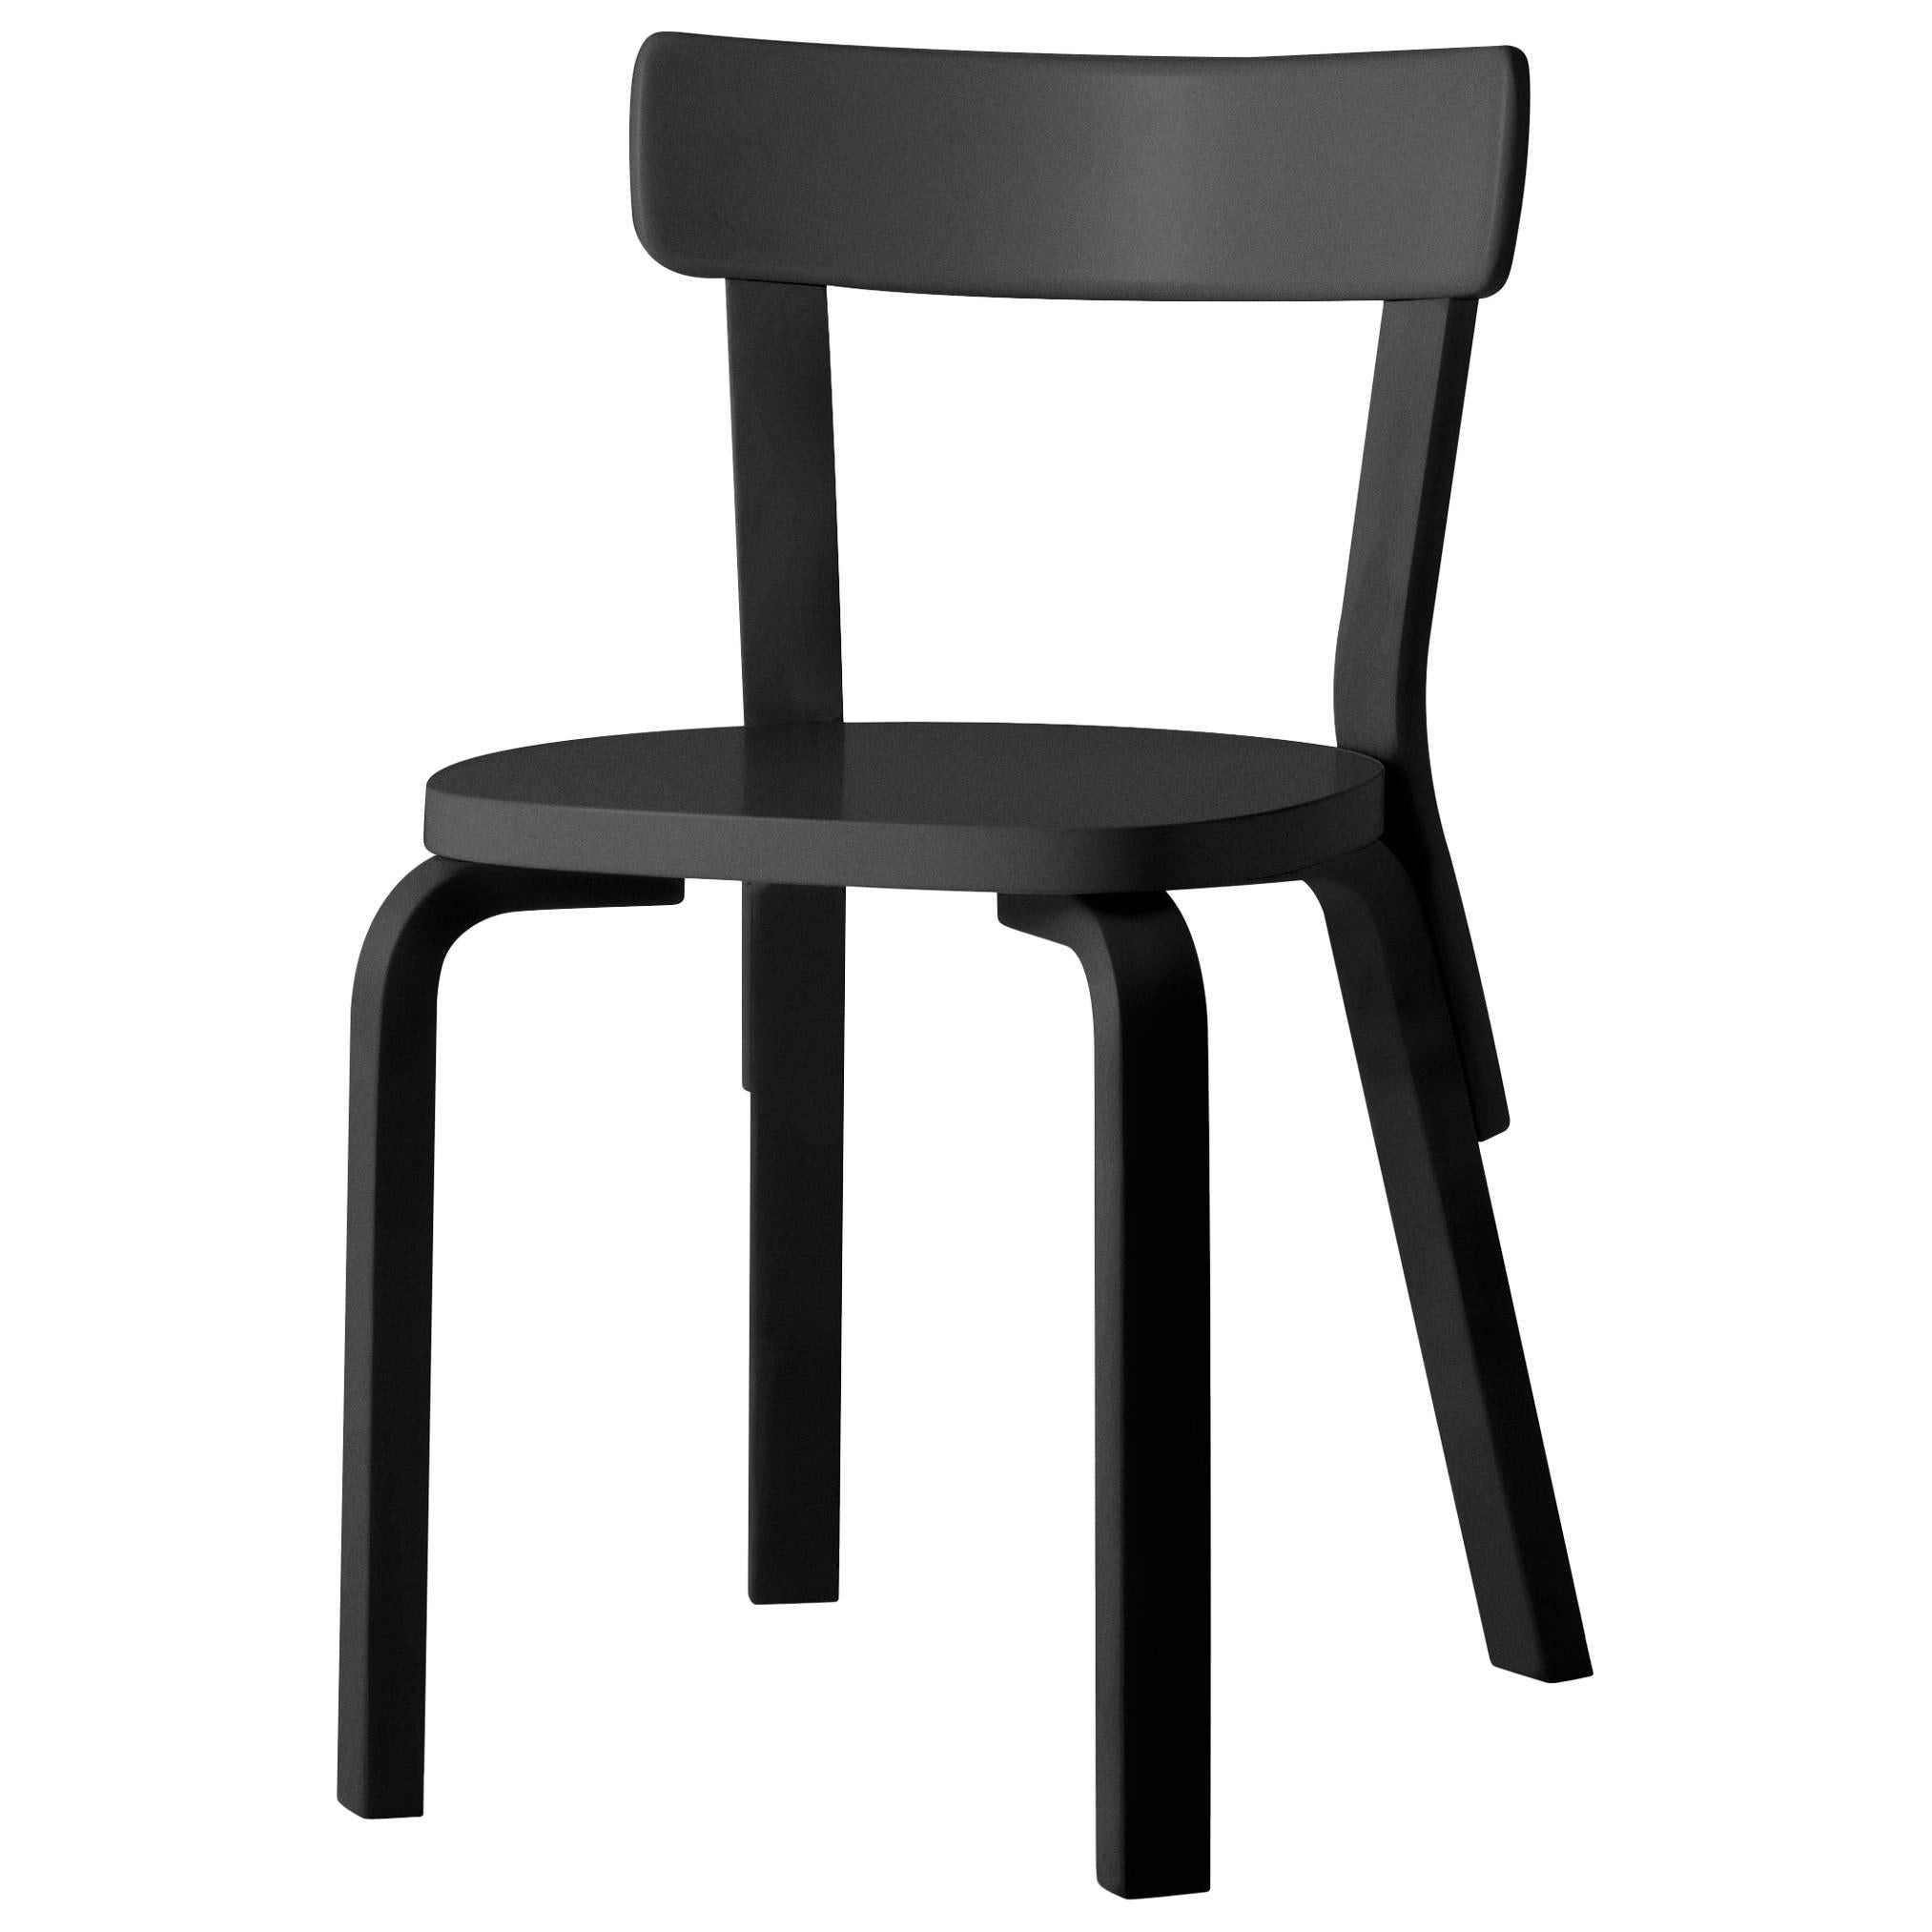 Authentic Chair 69 in Birch with Black Lacquer by Alvar Aalto & Artek